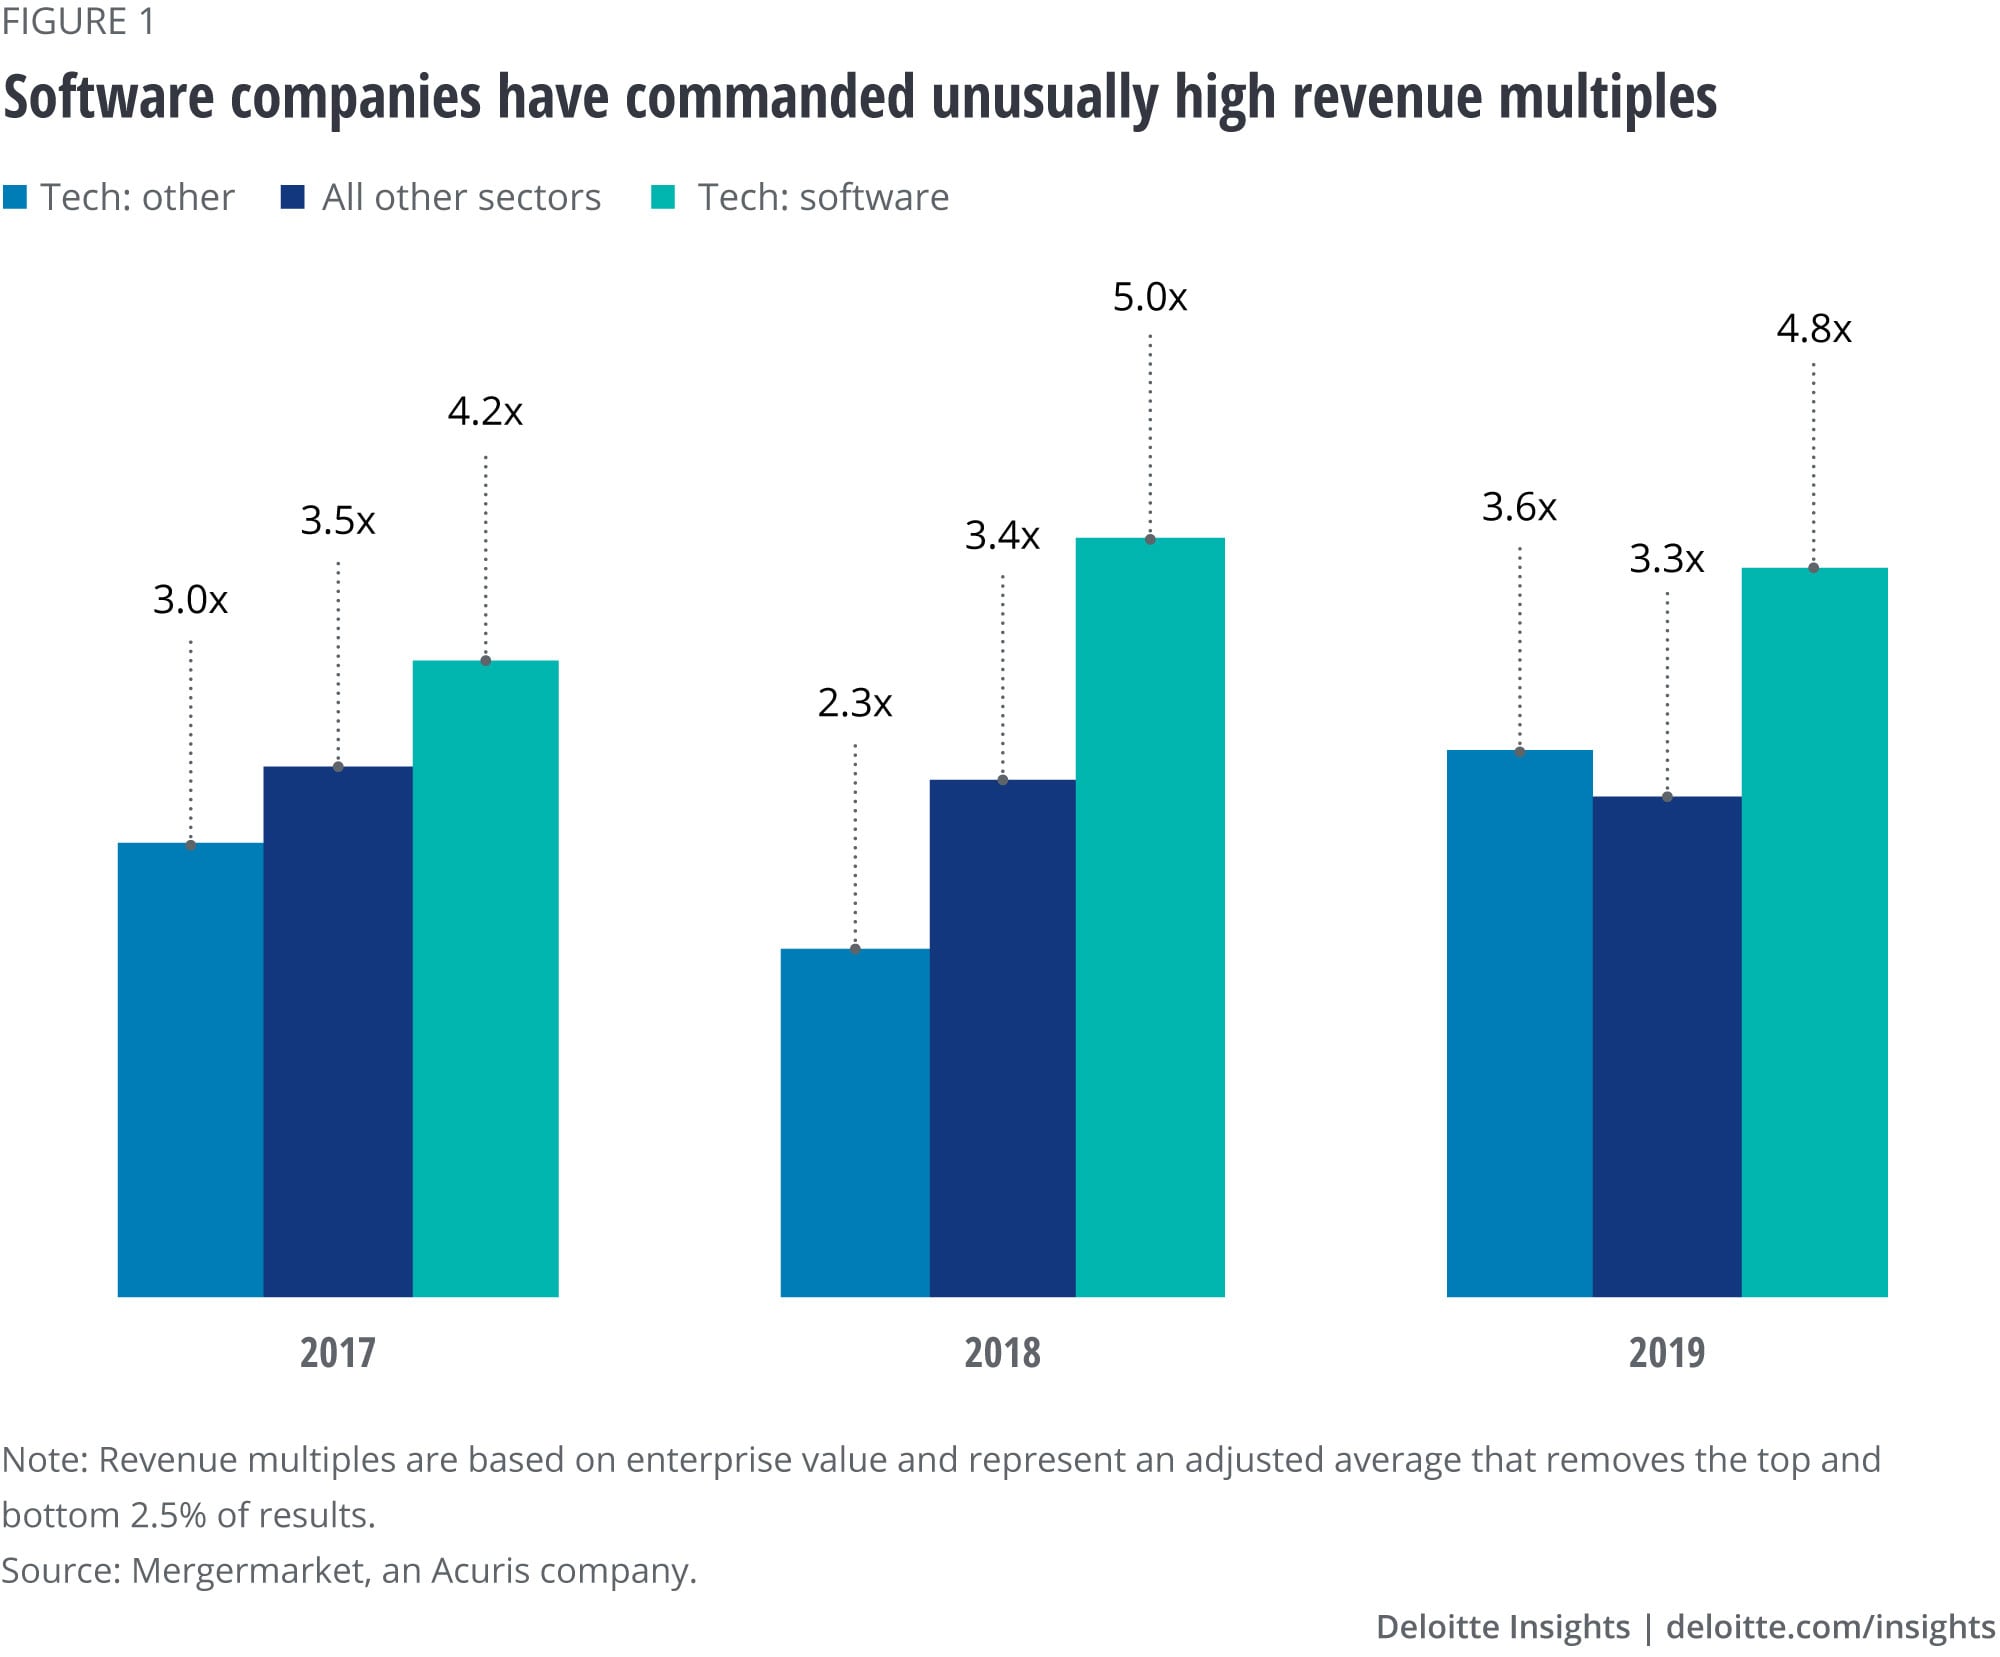 Software companies have commanded unusually high revenue multiples